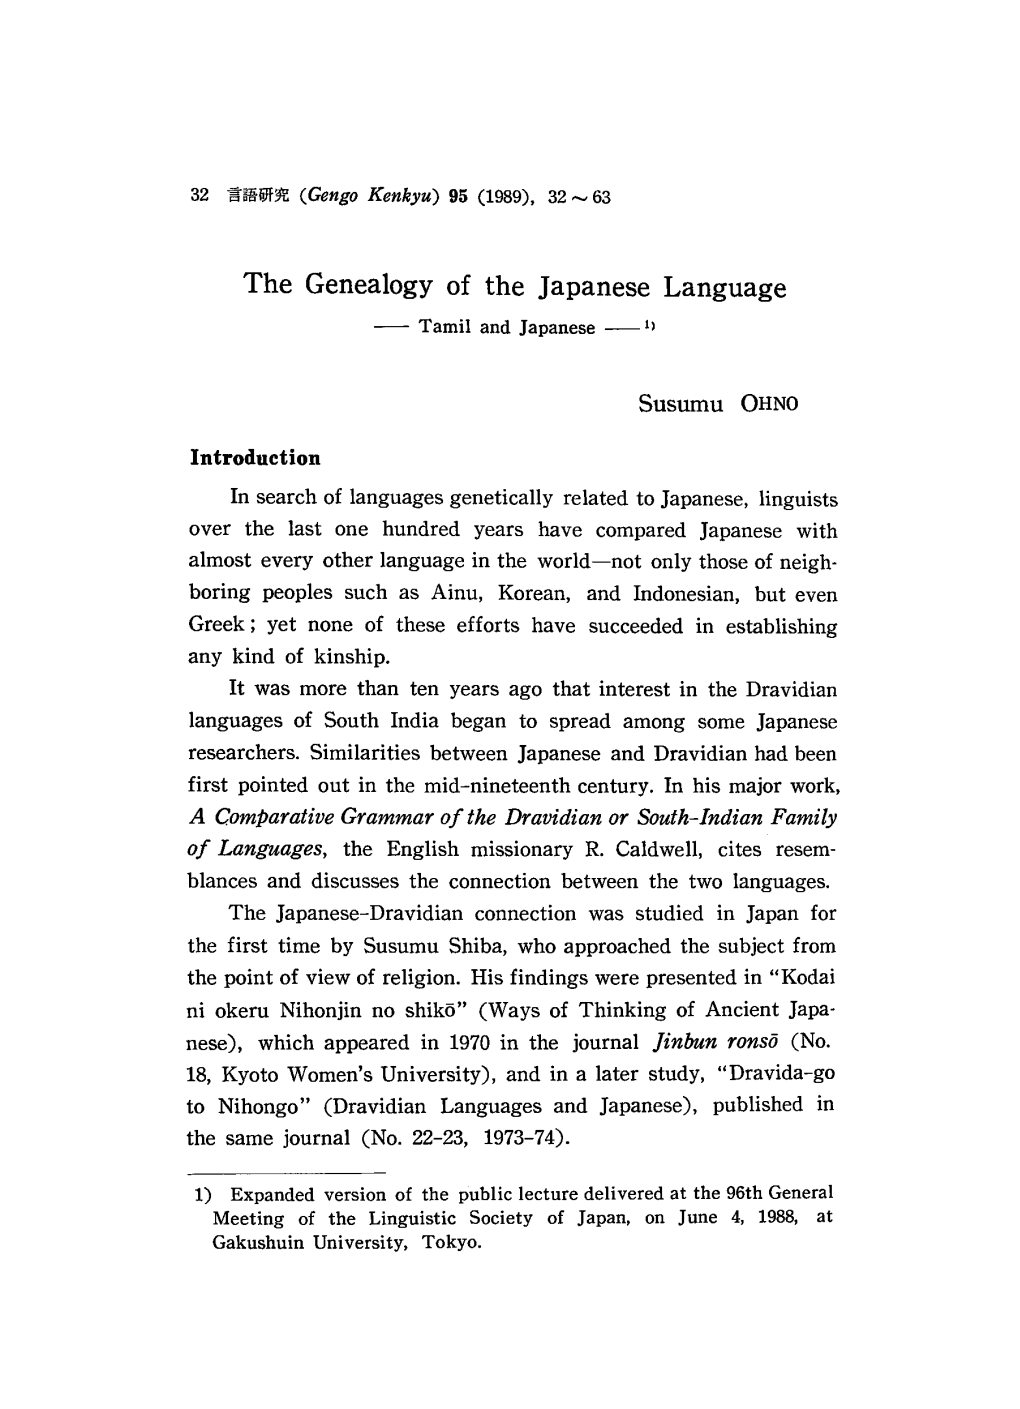 The Genealogy of the Japanese Language Tamil and Japanese 1)